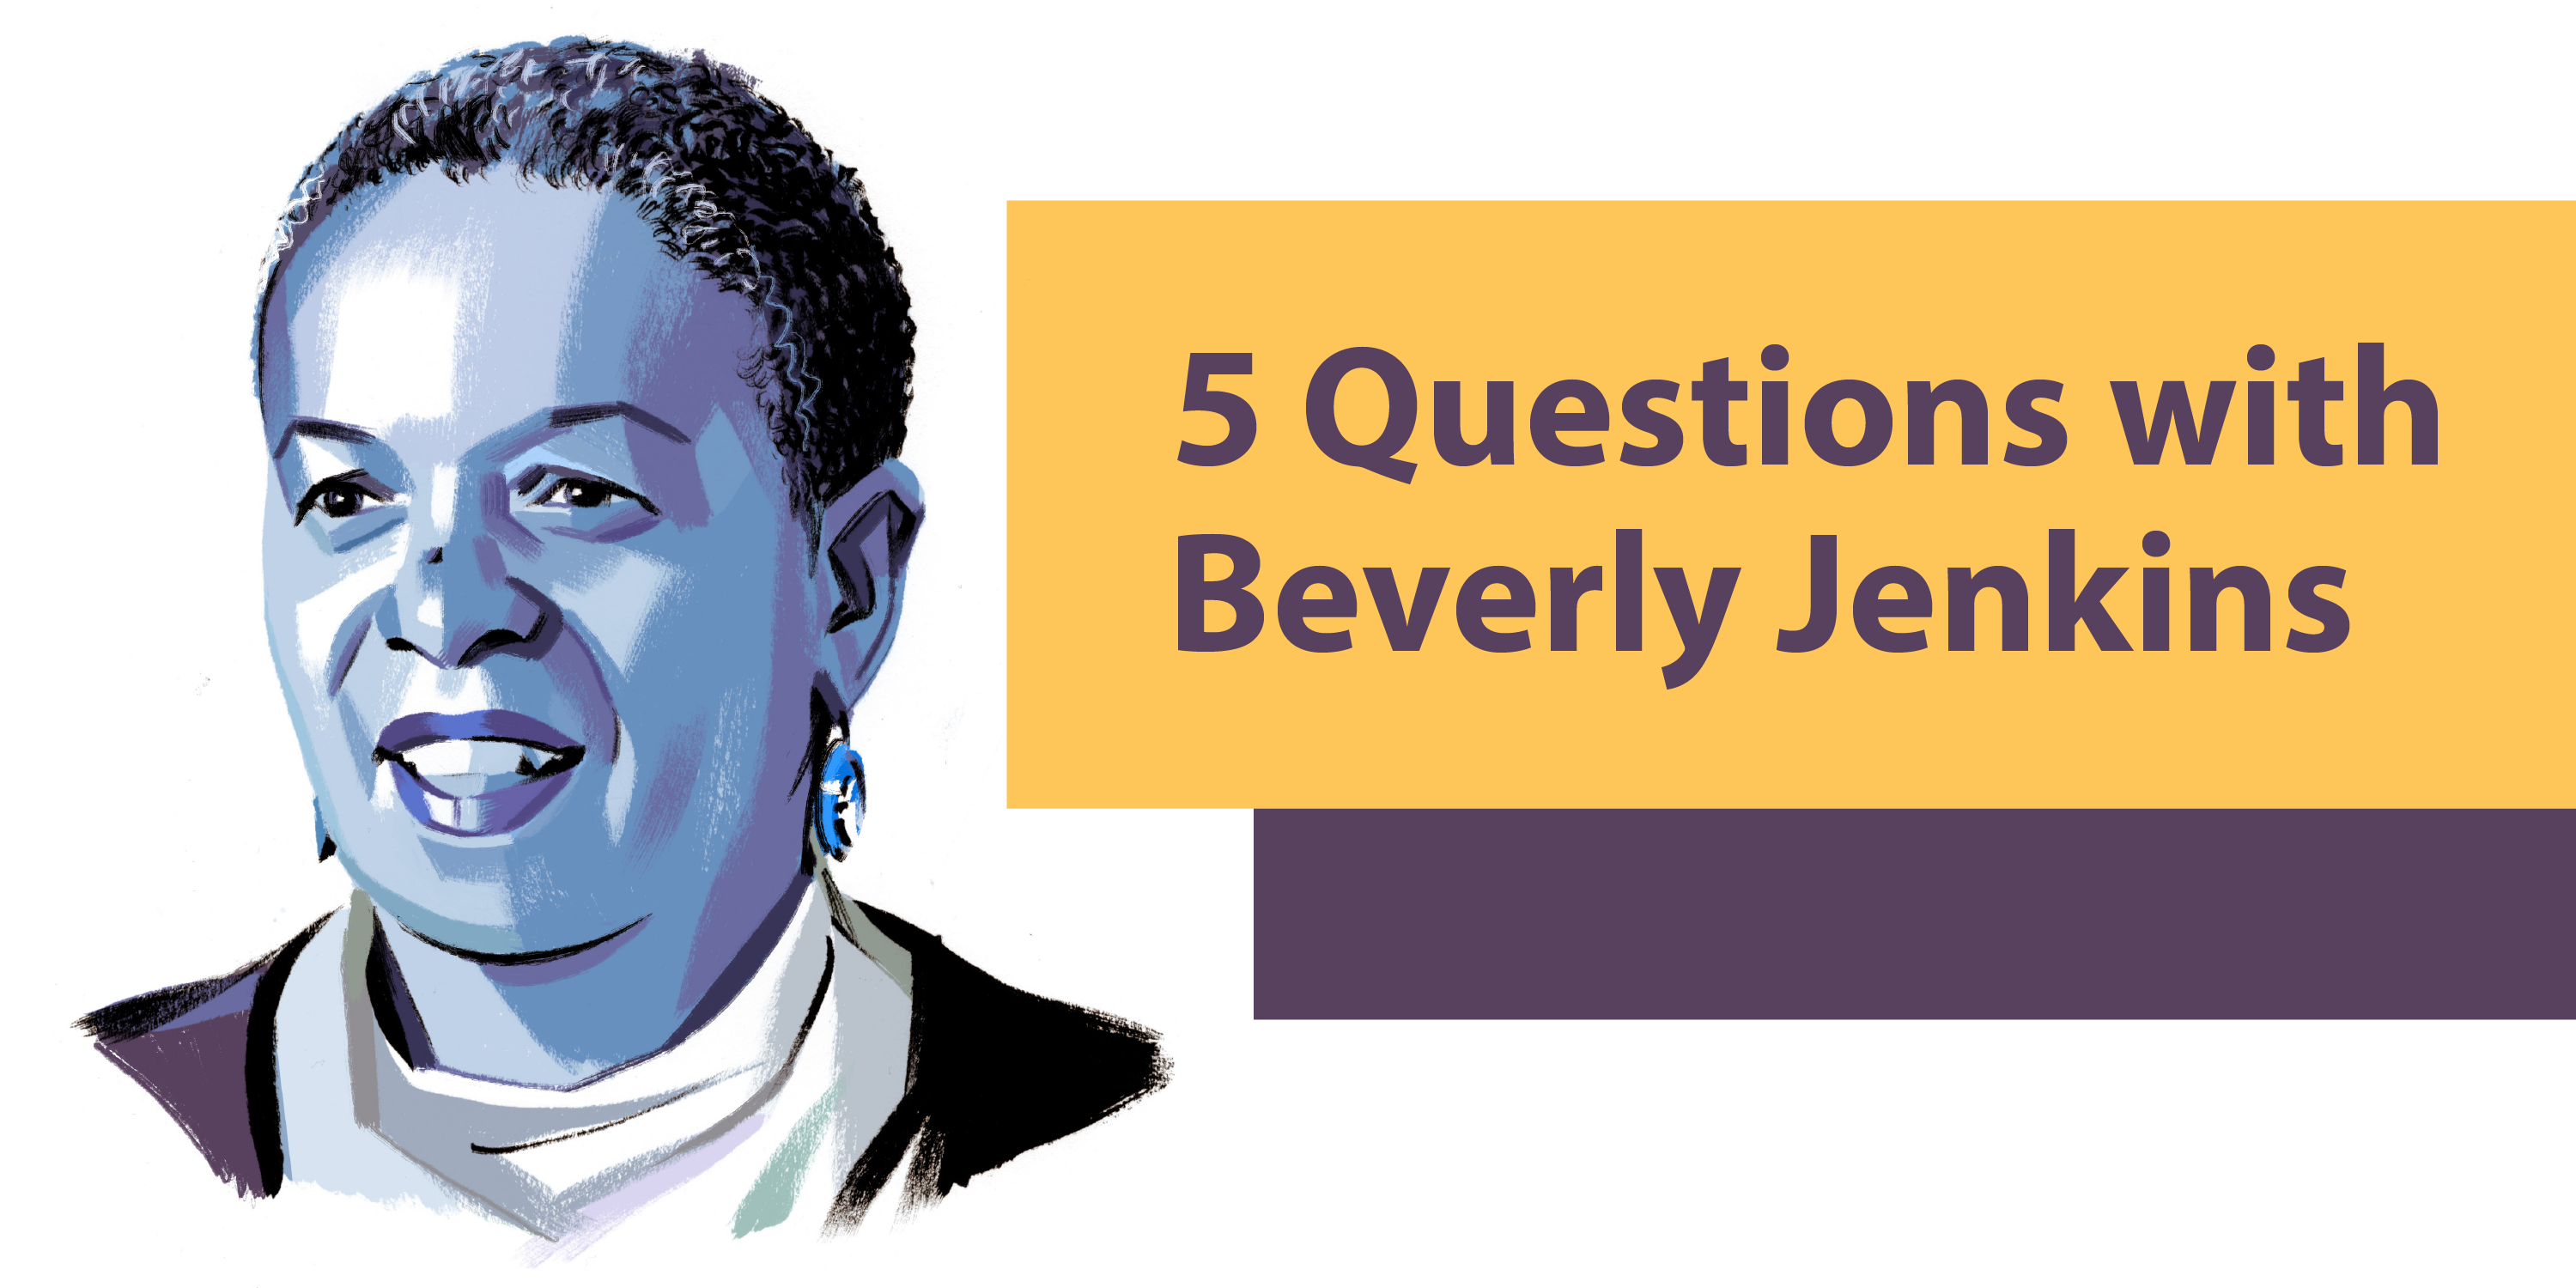 5 Questions with Beverly Jenkins